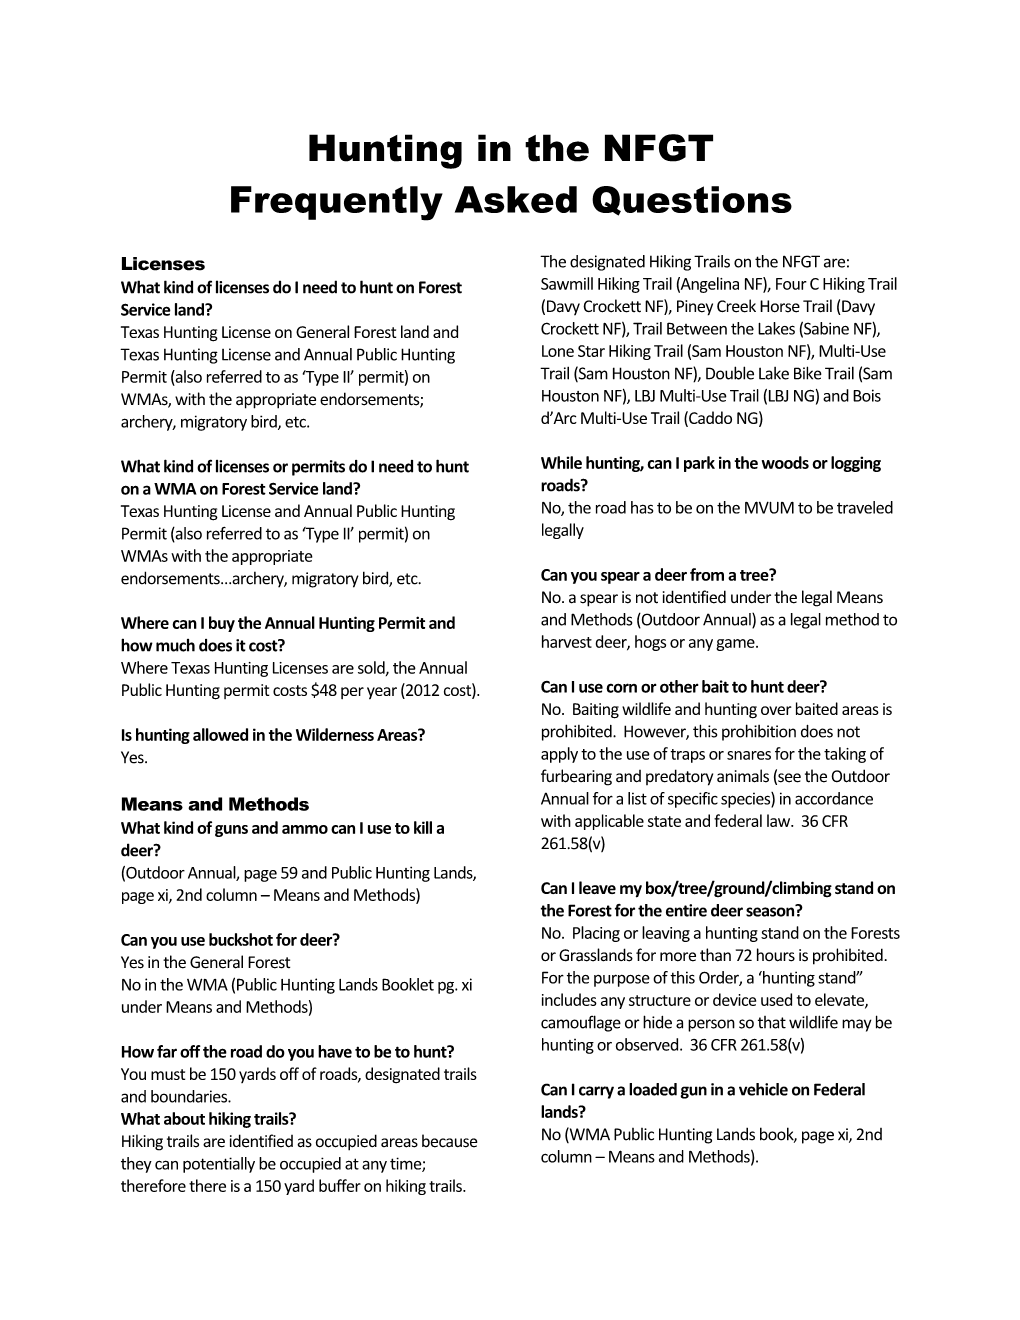 Hunting in the NFGT Frequently Asked Questions